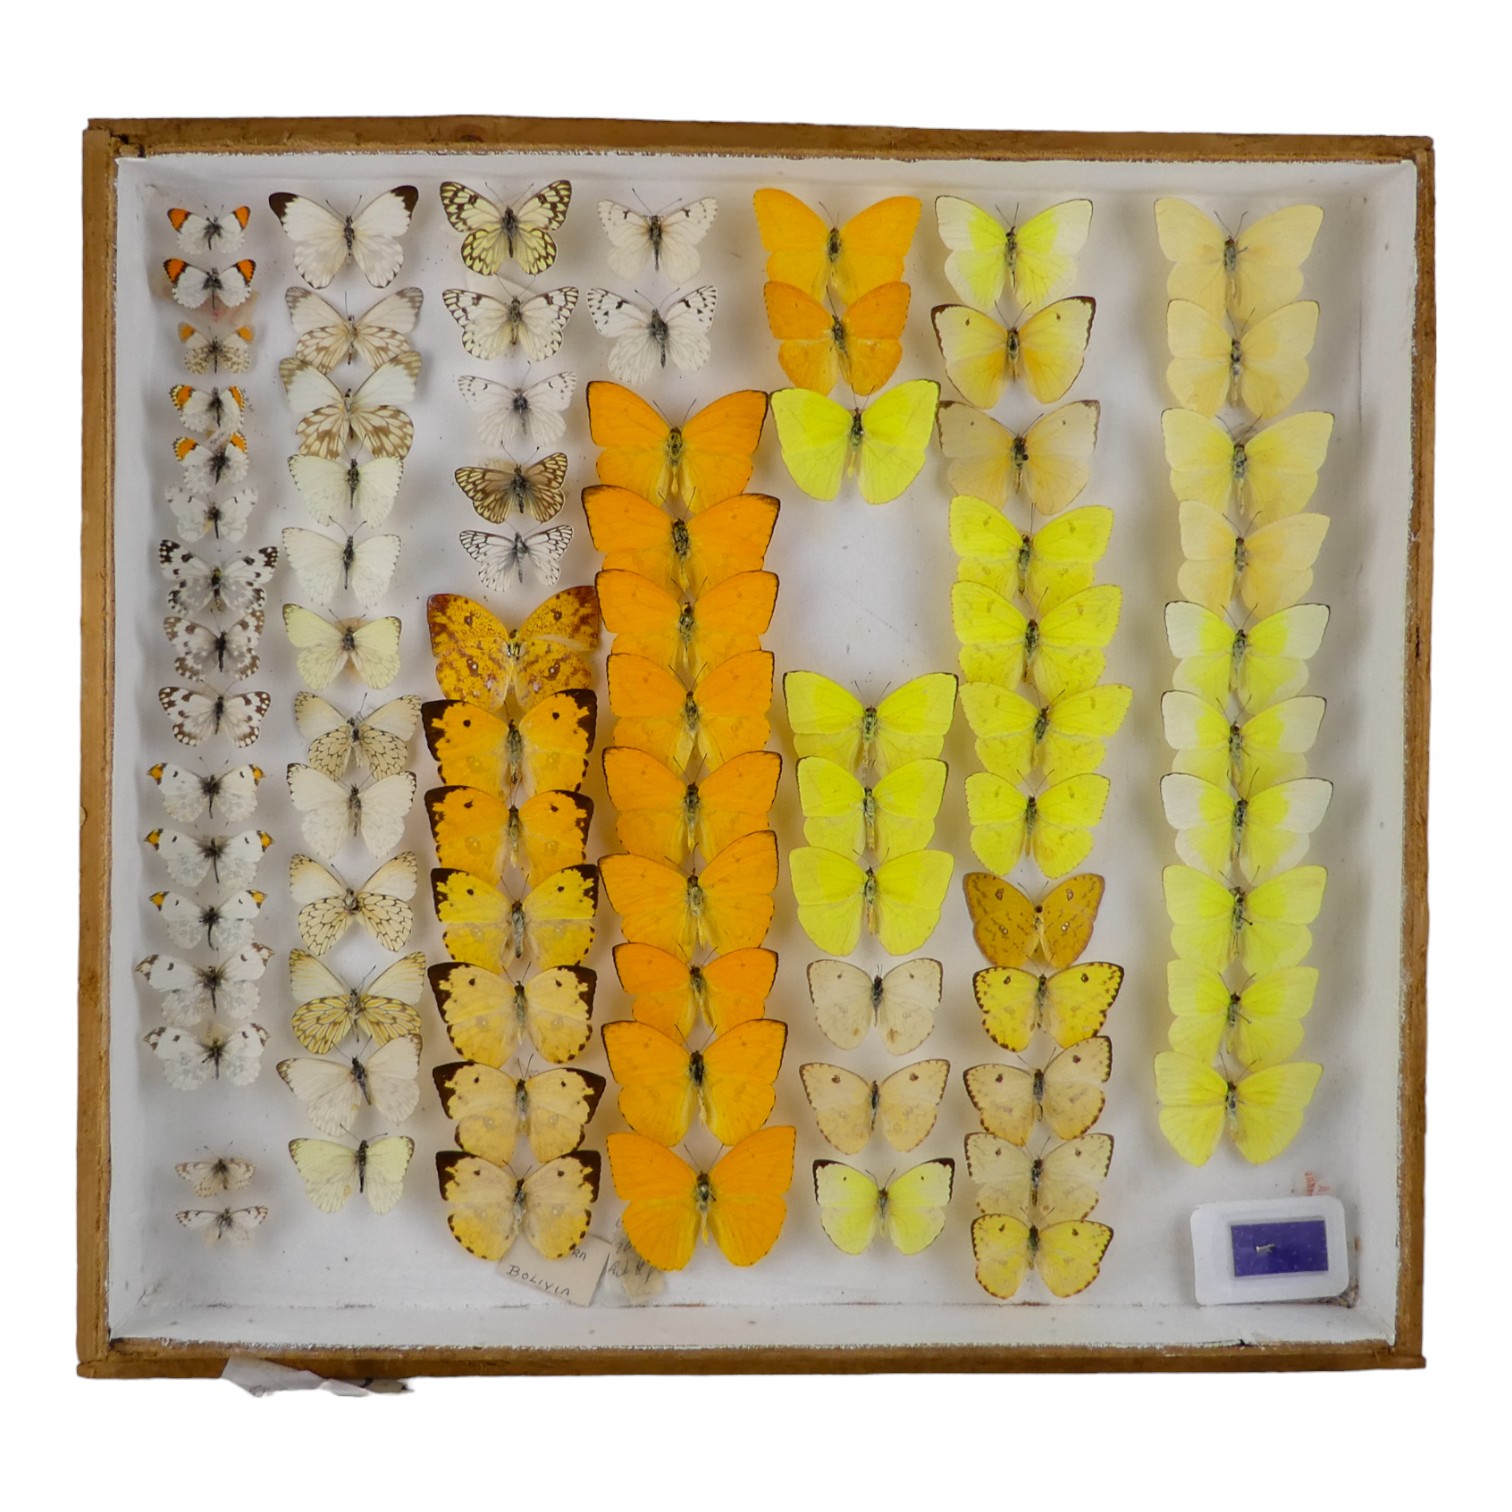 A case of butterflies in seven rows - including Lemon Migrant, Apricot Sulphur, Orange Tip and